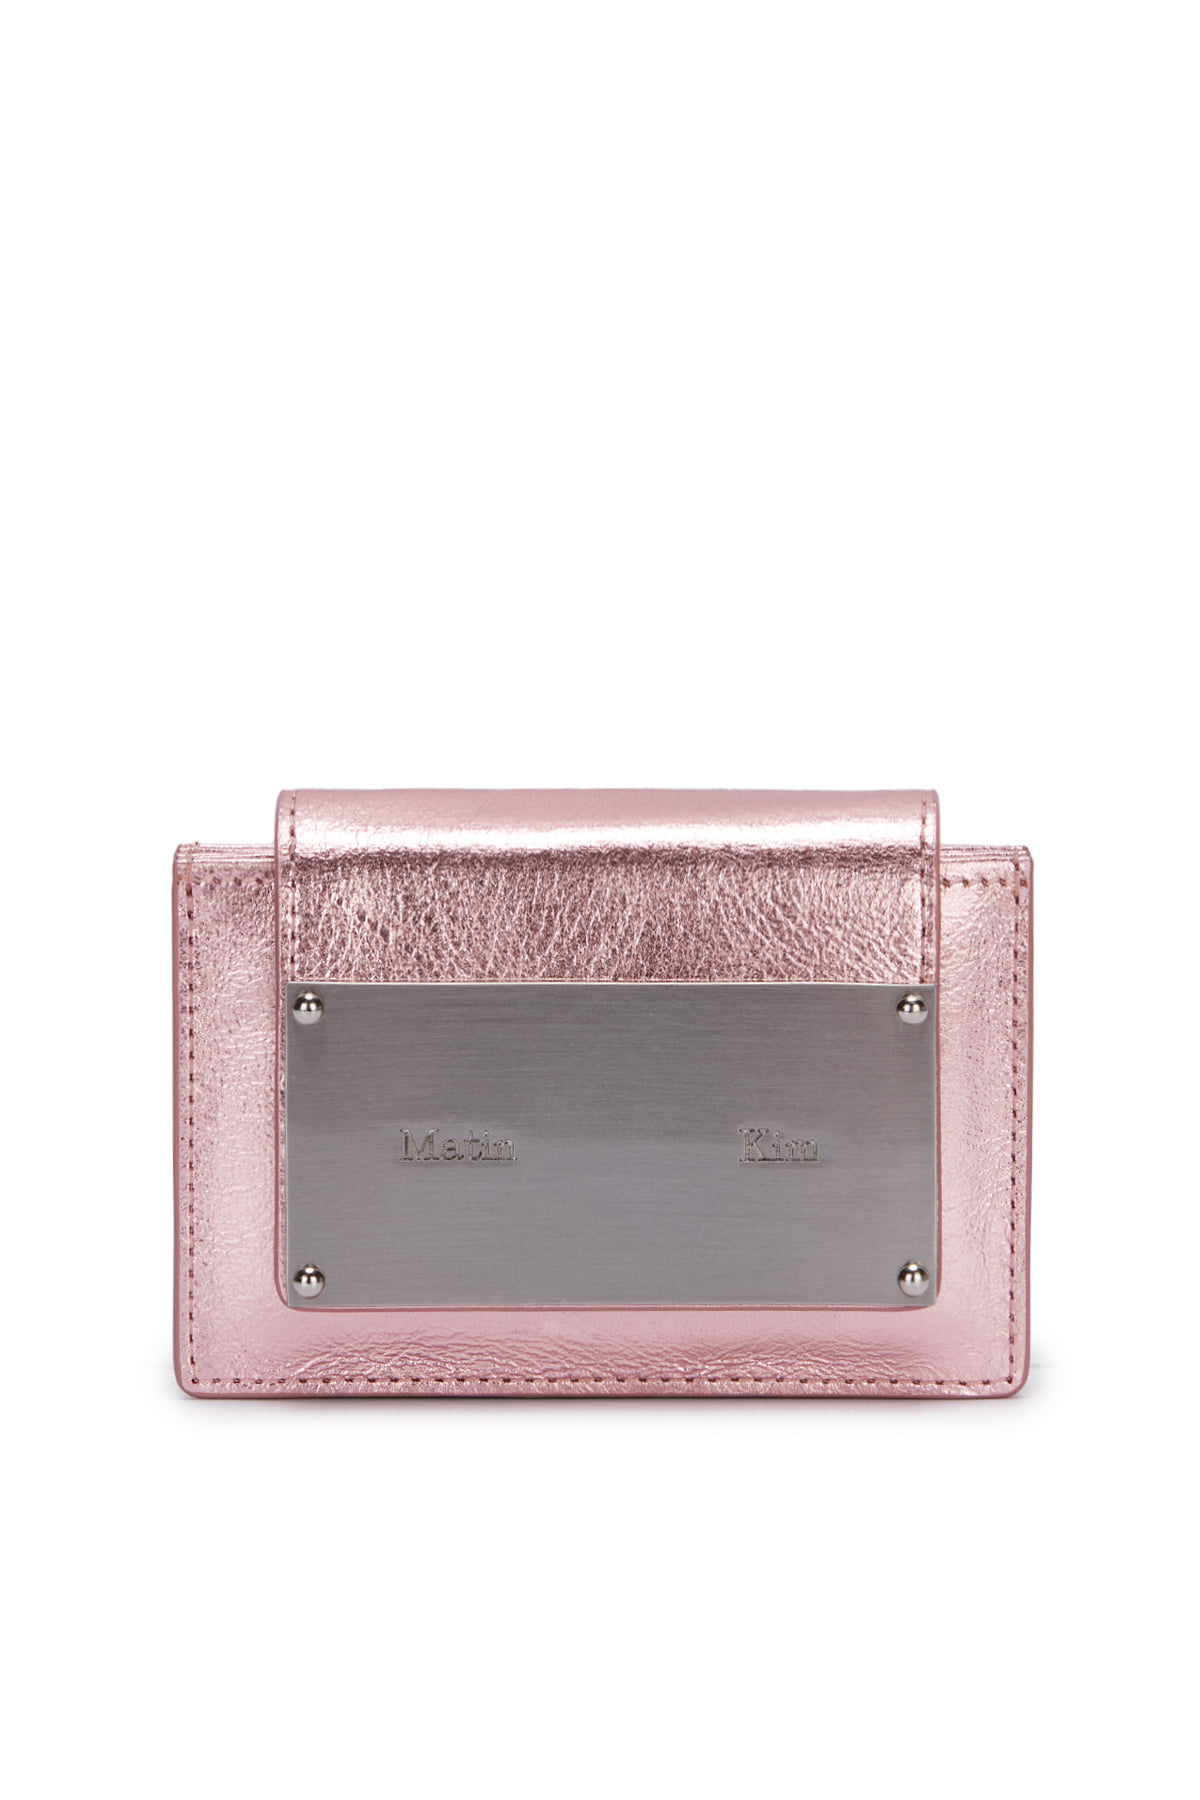 ACCORDION WALLET IN INDIAN PINK - MATINKIM